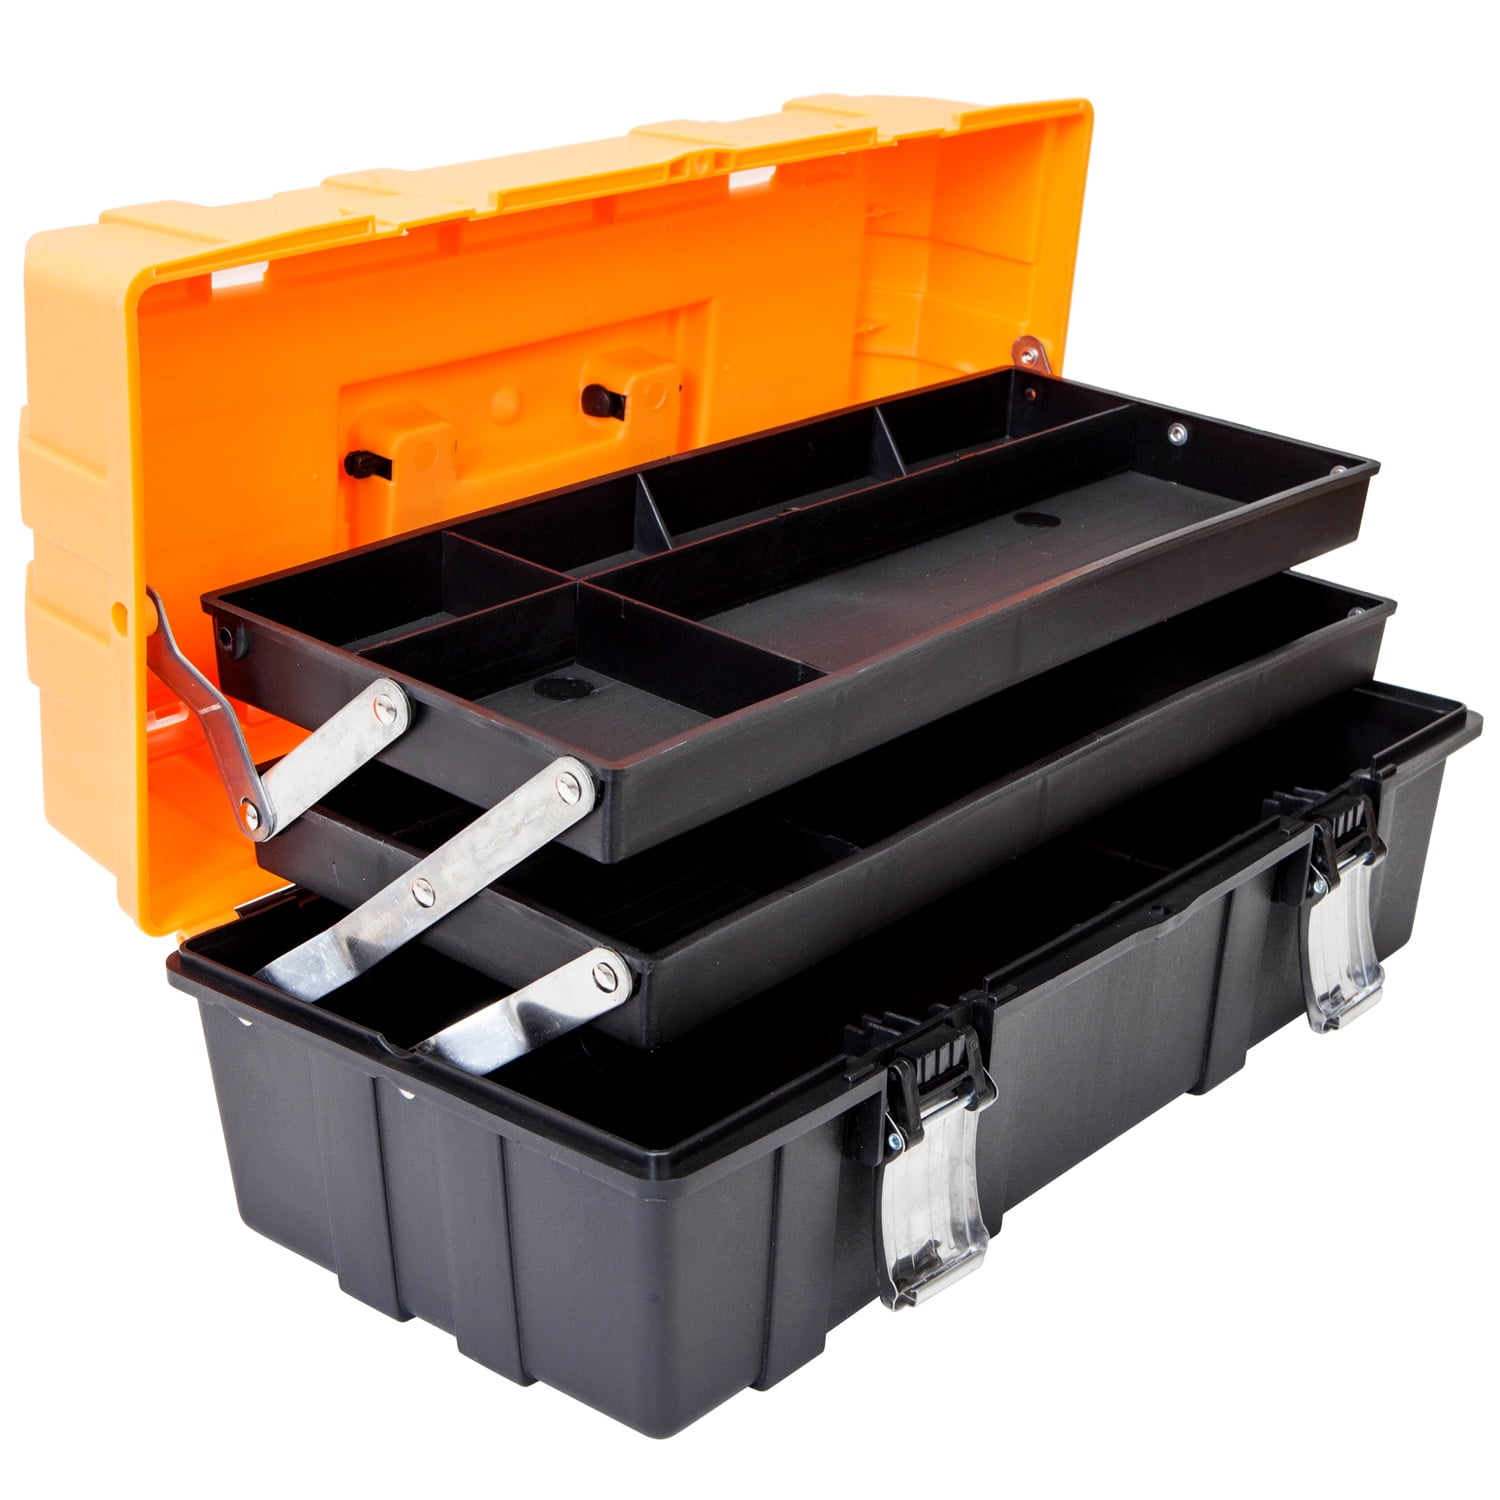 Portable Tool Box, Folding Tool Storage Box Rivet Fixing 2 Layers 3 Trays  Shockproof Large Capacity for Industrial Part Sorting (350 Type)